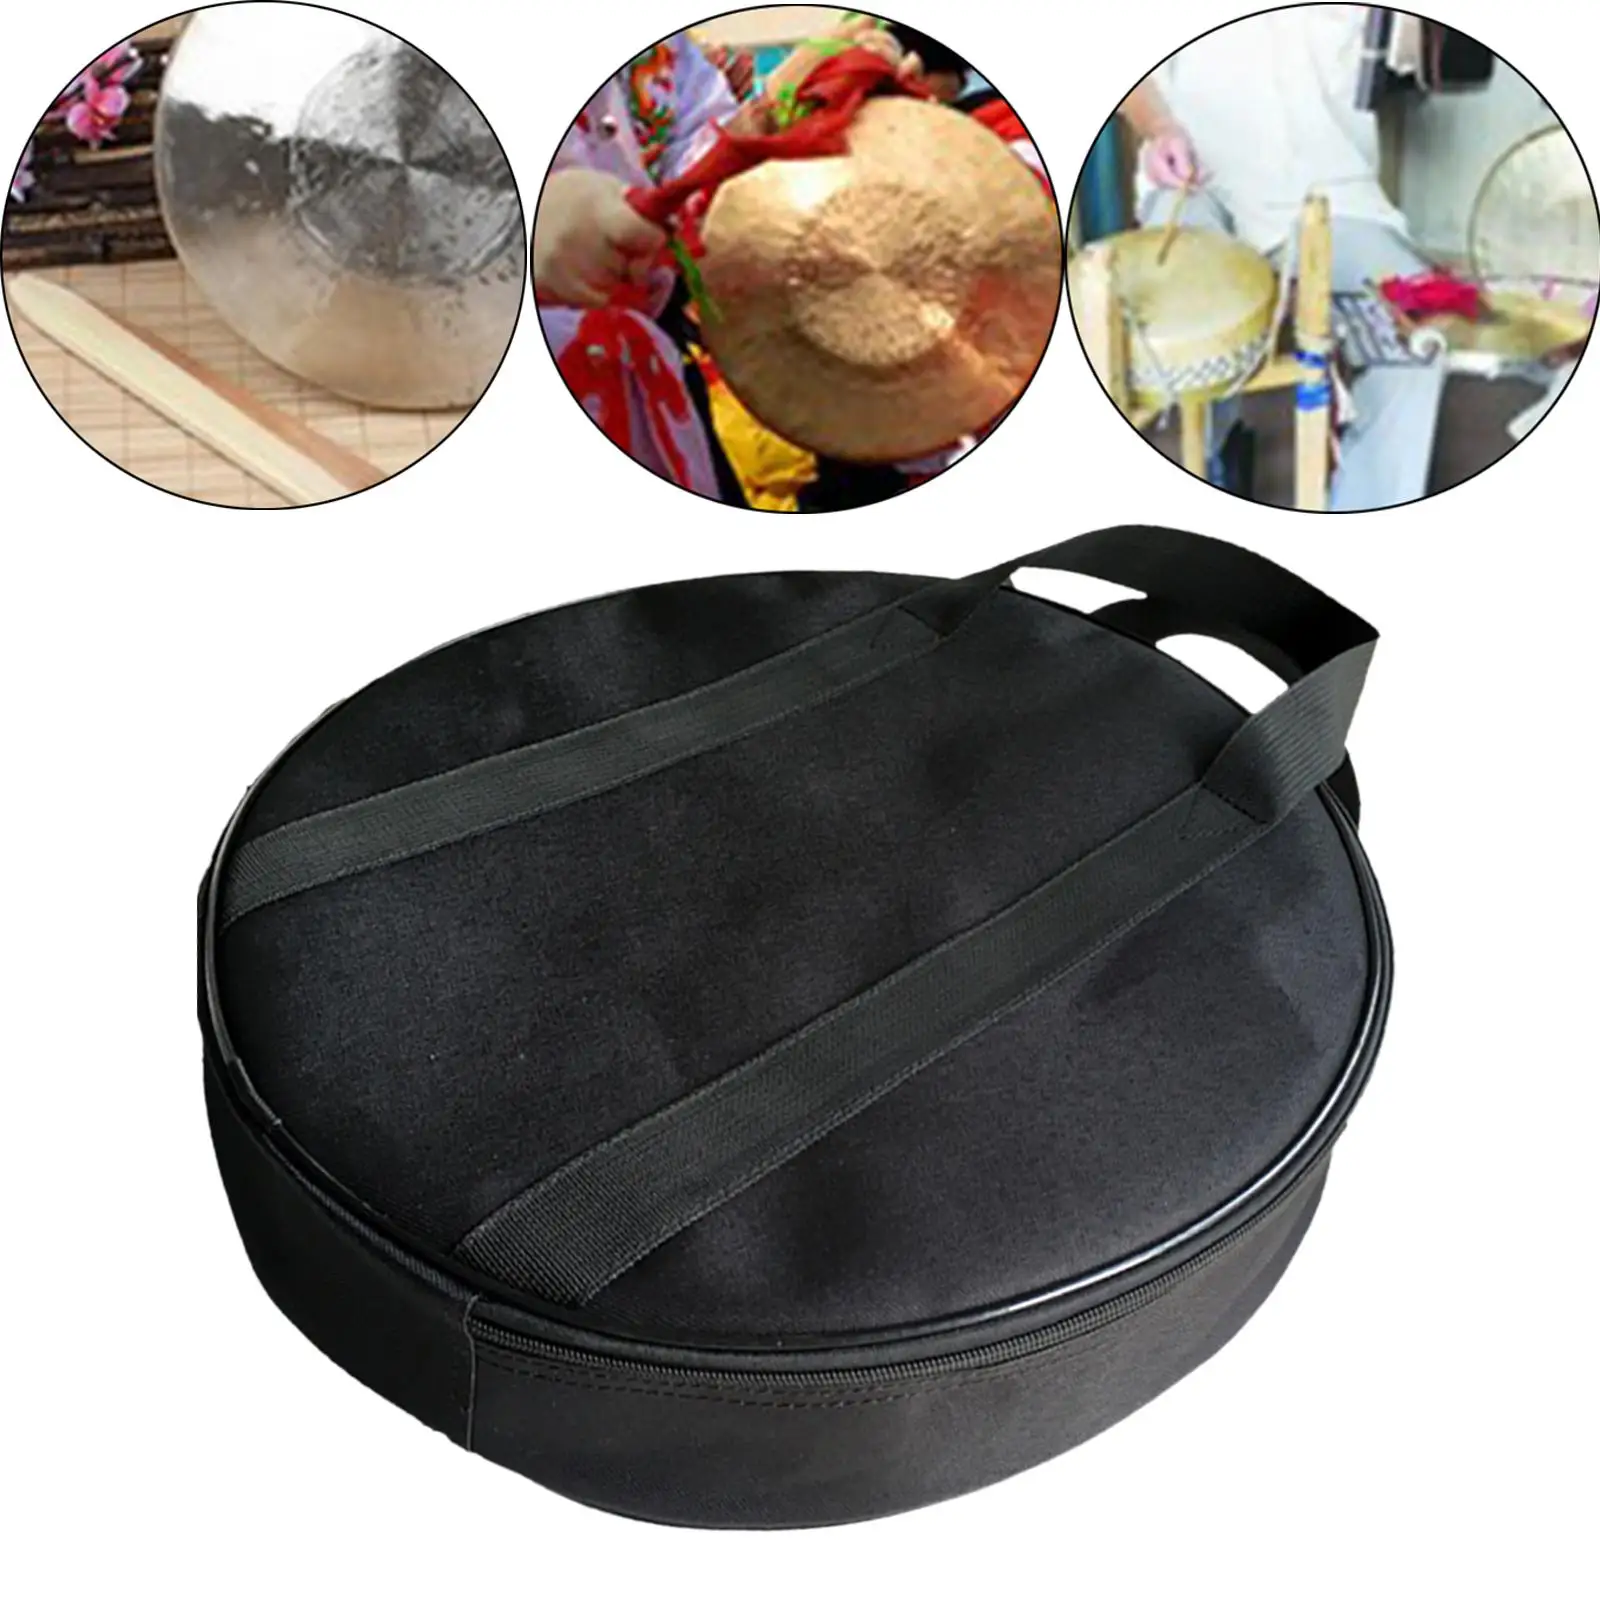 High Quality Cymbal Gig Bag Water Proof with Carry Handle Black Oxford Cloth